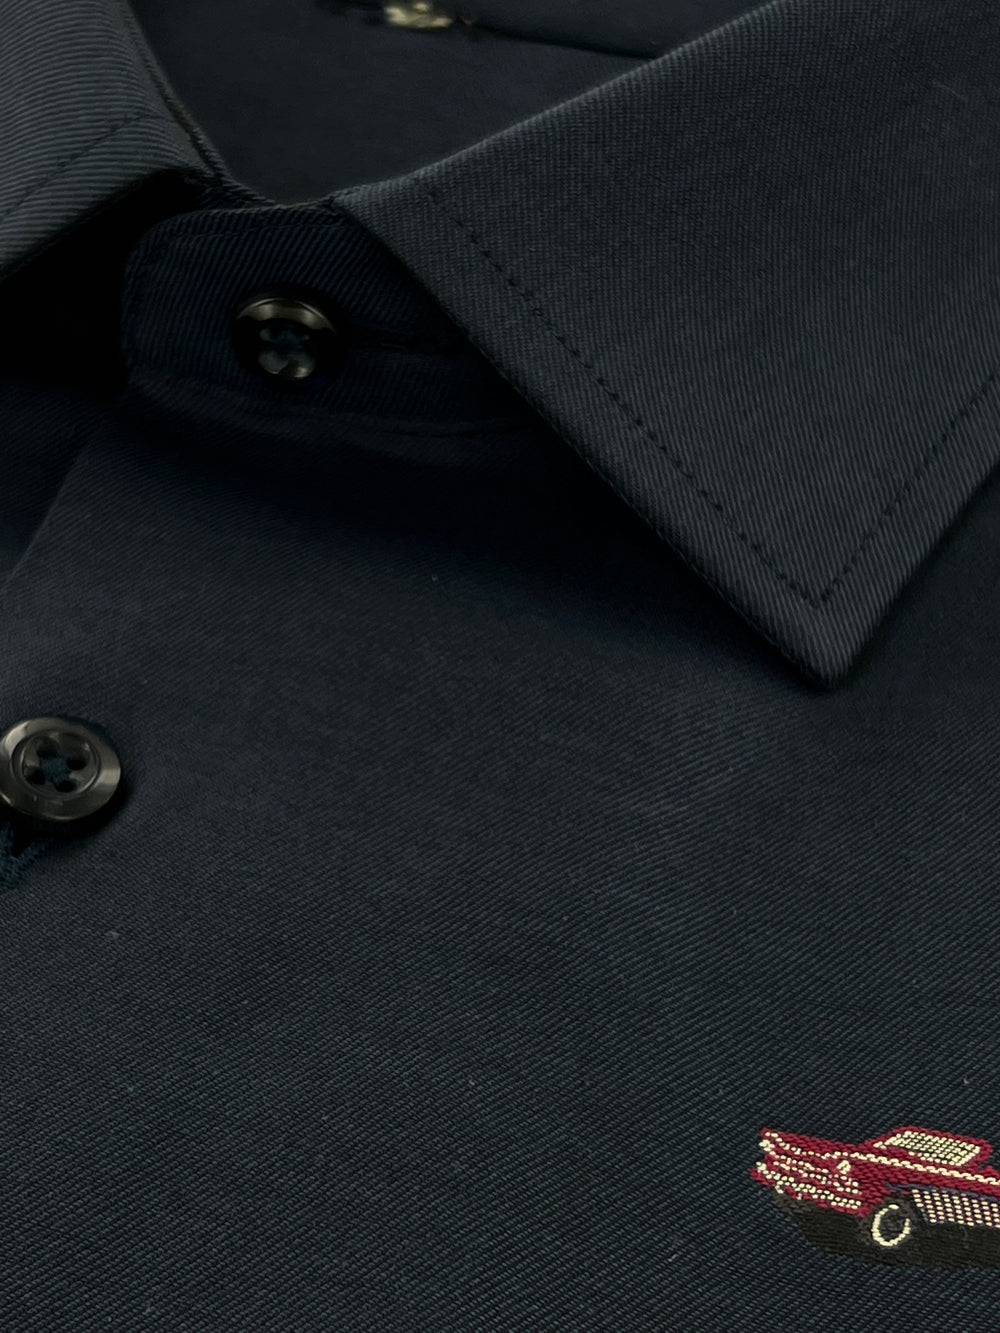 Fitted shirt in navy blue patterned twill